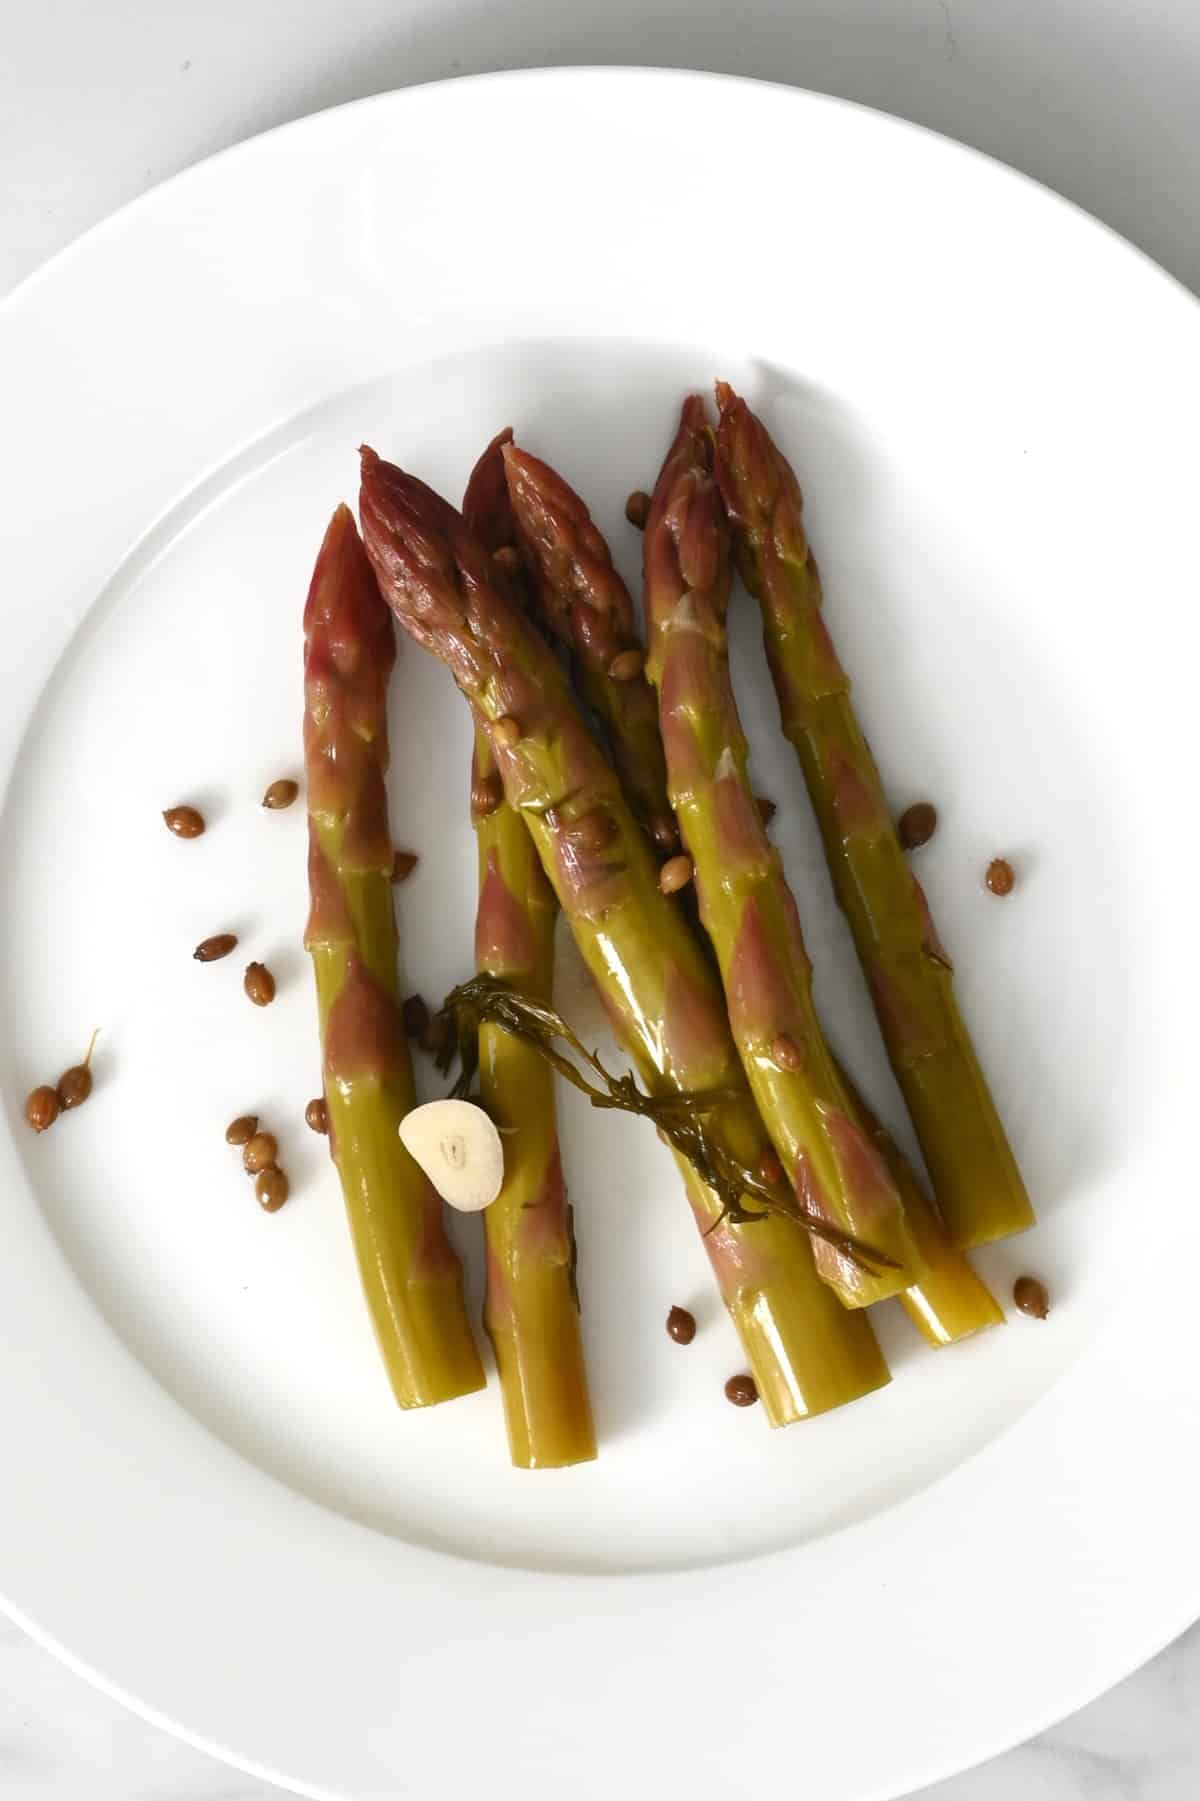 Six asparagus pickles on a plate